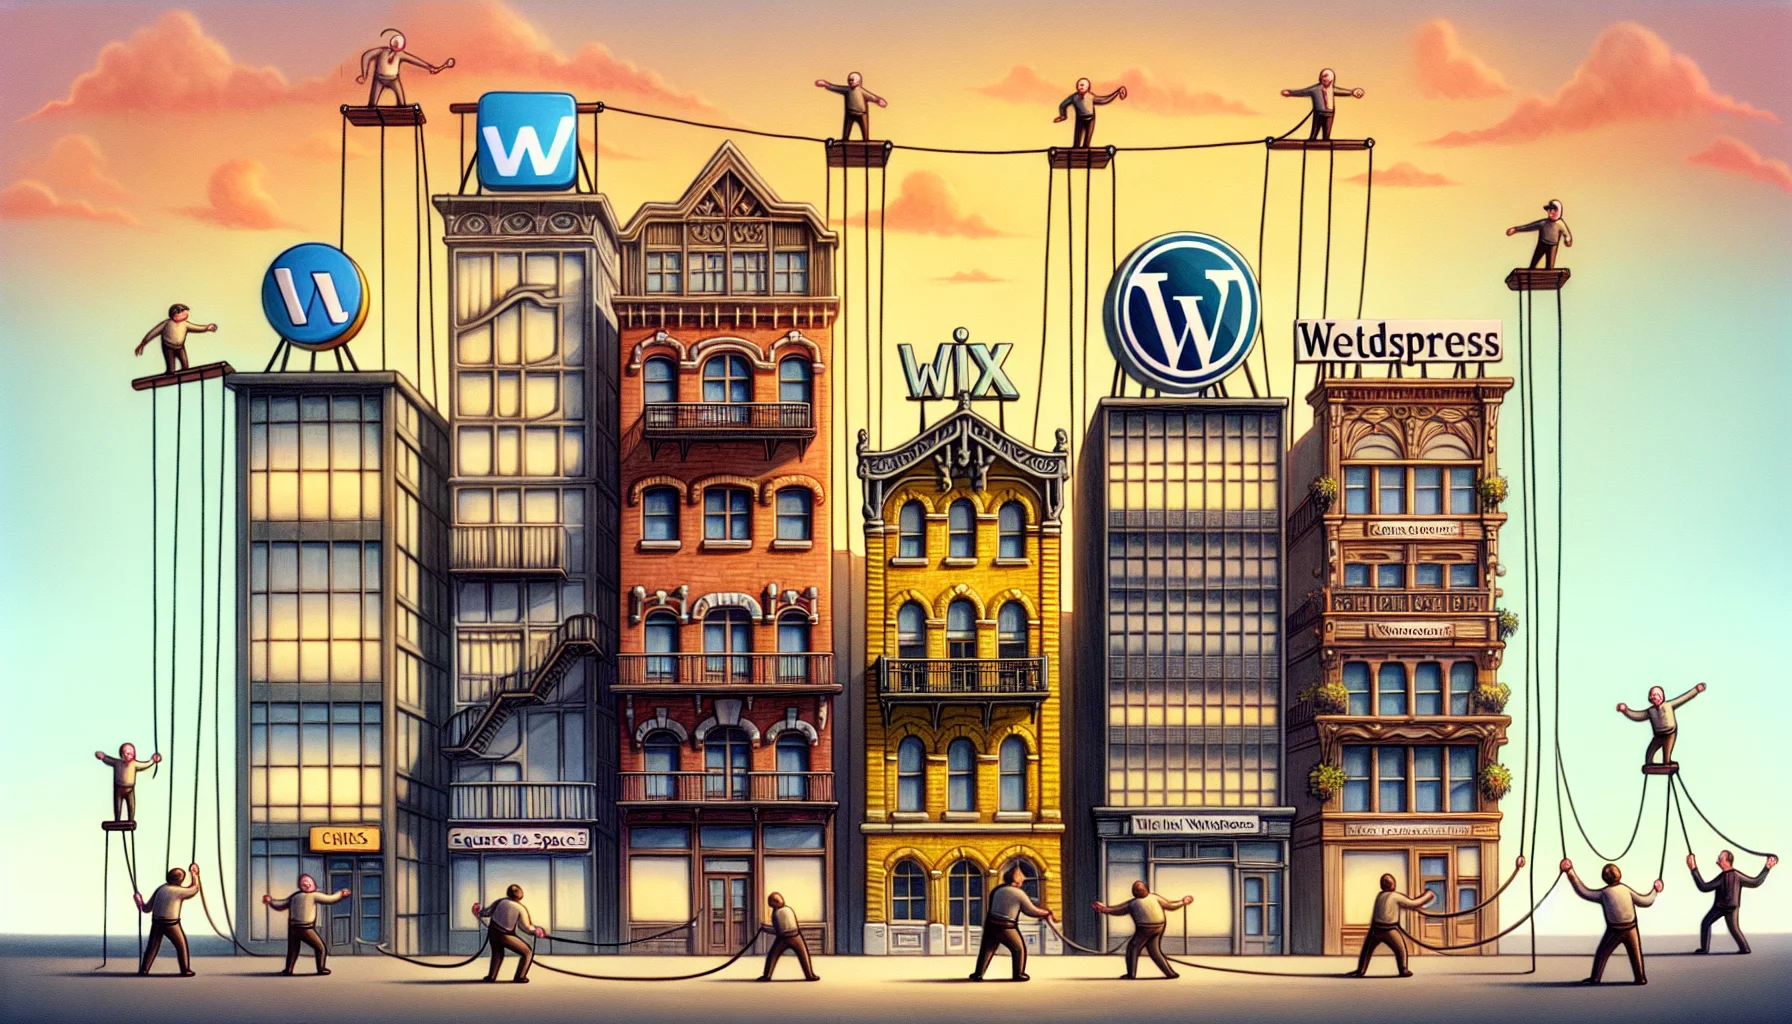 Envision an amusing scenario where different web hosting alternatives to Squarespace are represented as metaphorical buildings in a cityscape. Each building has its own unique and comical design reflecting its characteristic features. A yellow-brick 'Wix' skyscraper with intricate balconies, an 'WordPress' Art Nouveau building with ornate ironwork. Adding to the humour, show website designers as cartoon characters, performing entertaining antics such as tightrope walking from one building to another, or using pulleys to lift website elements up to the buildings. The sky is painted with warm hues of a sunset, reinforcing the idea of web hosting being an interesting, continuous journey.